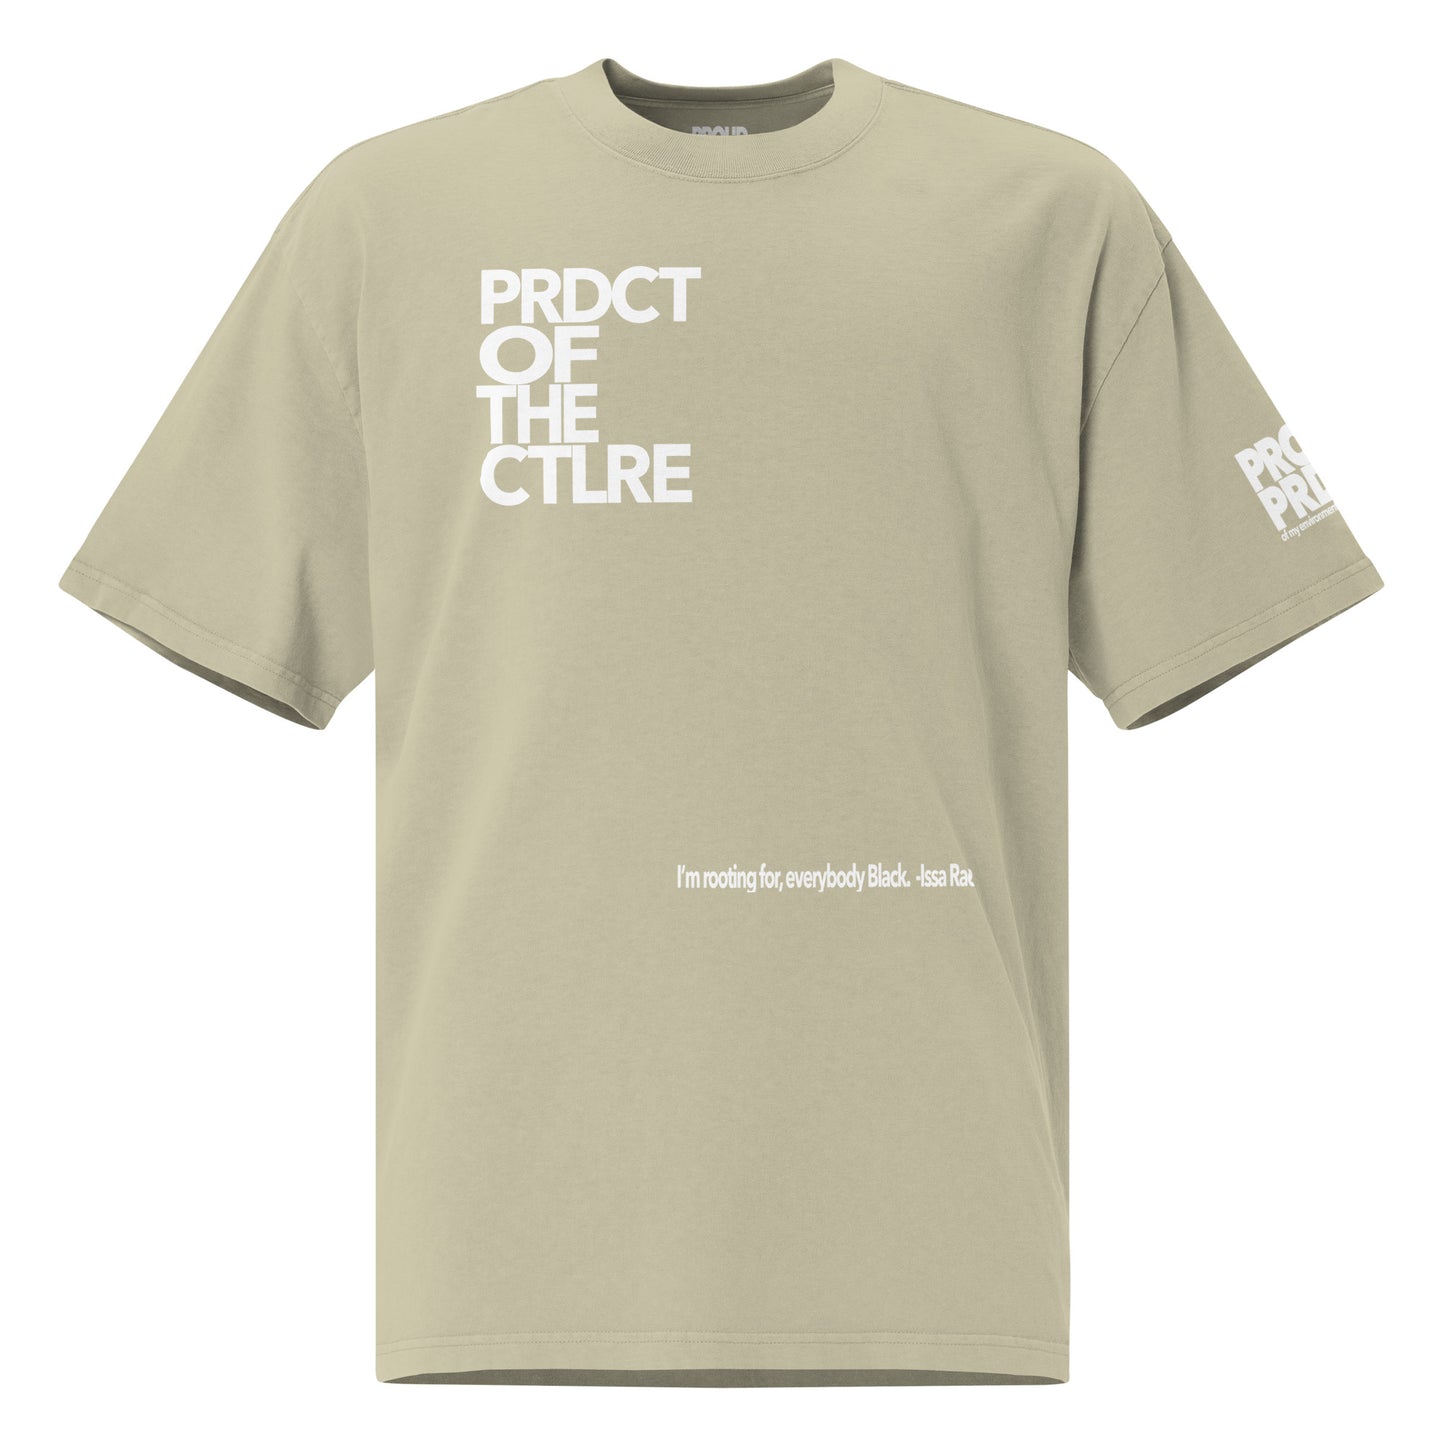 "Product of the Culture" Oversized t-shirt